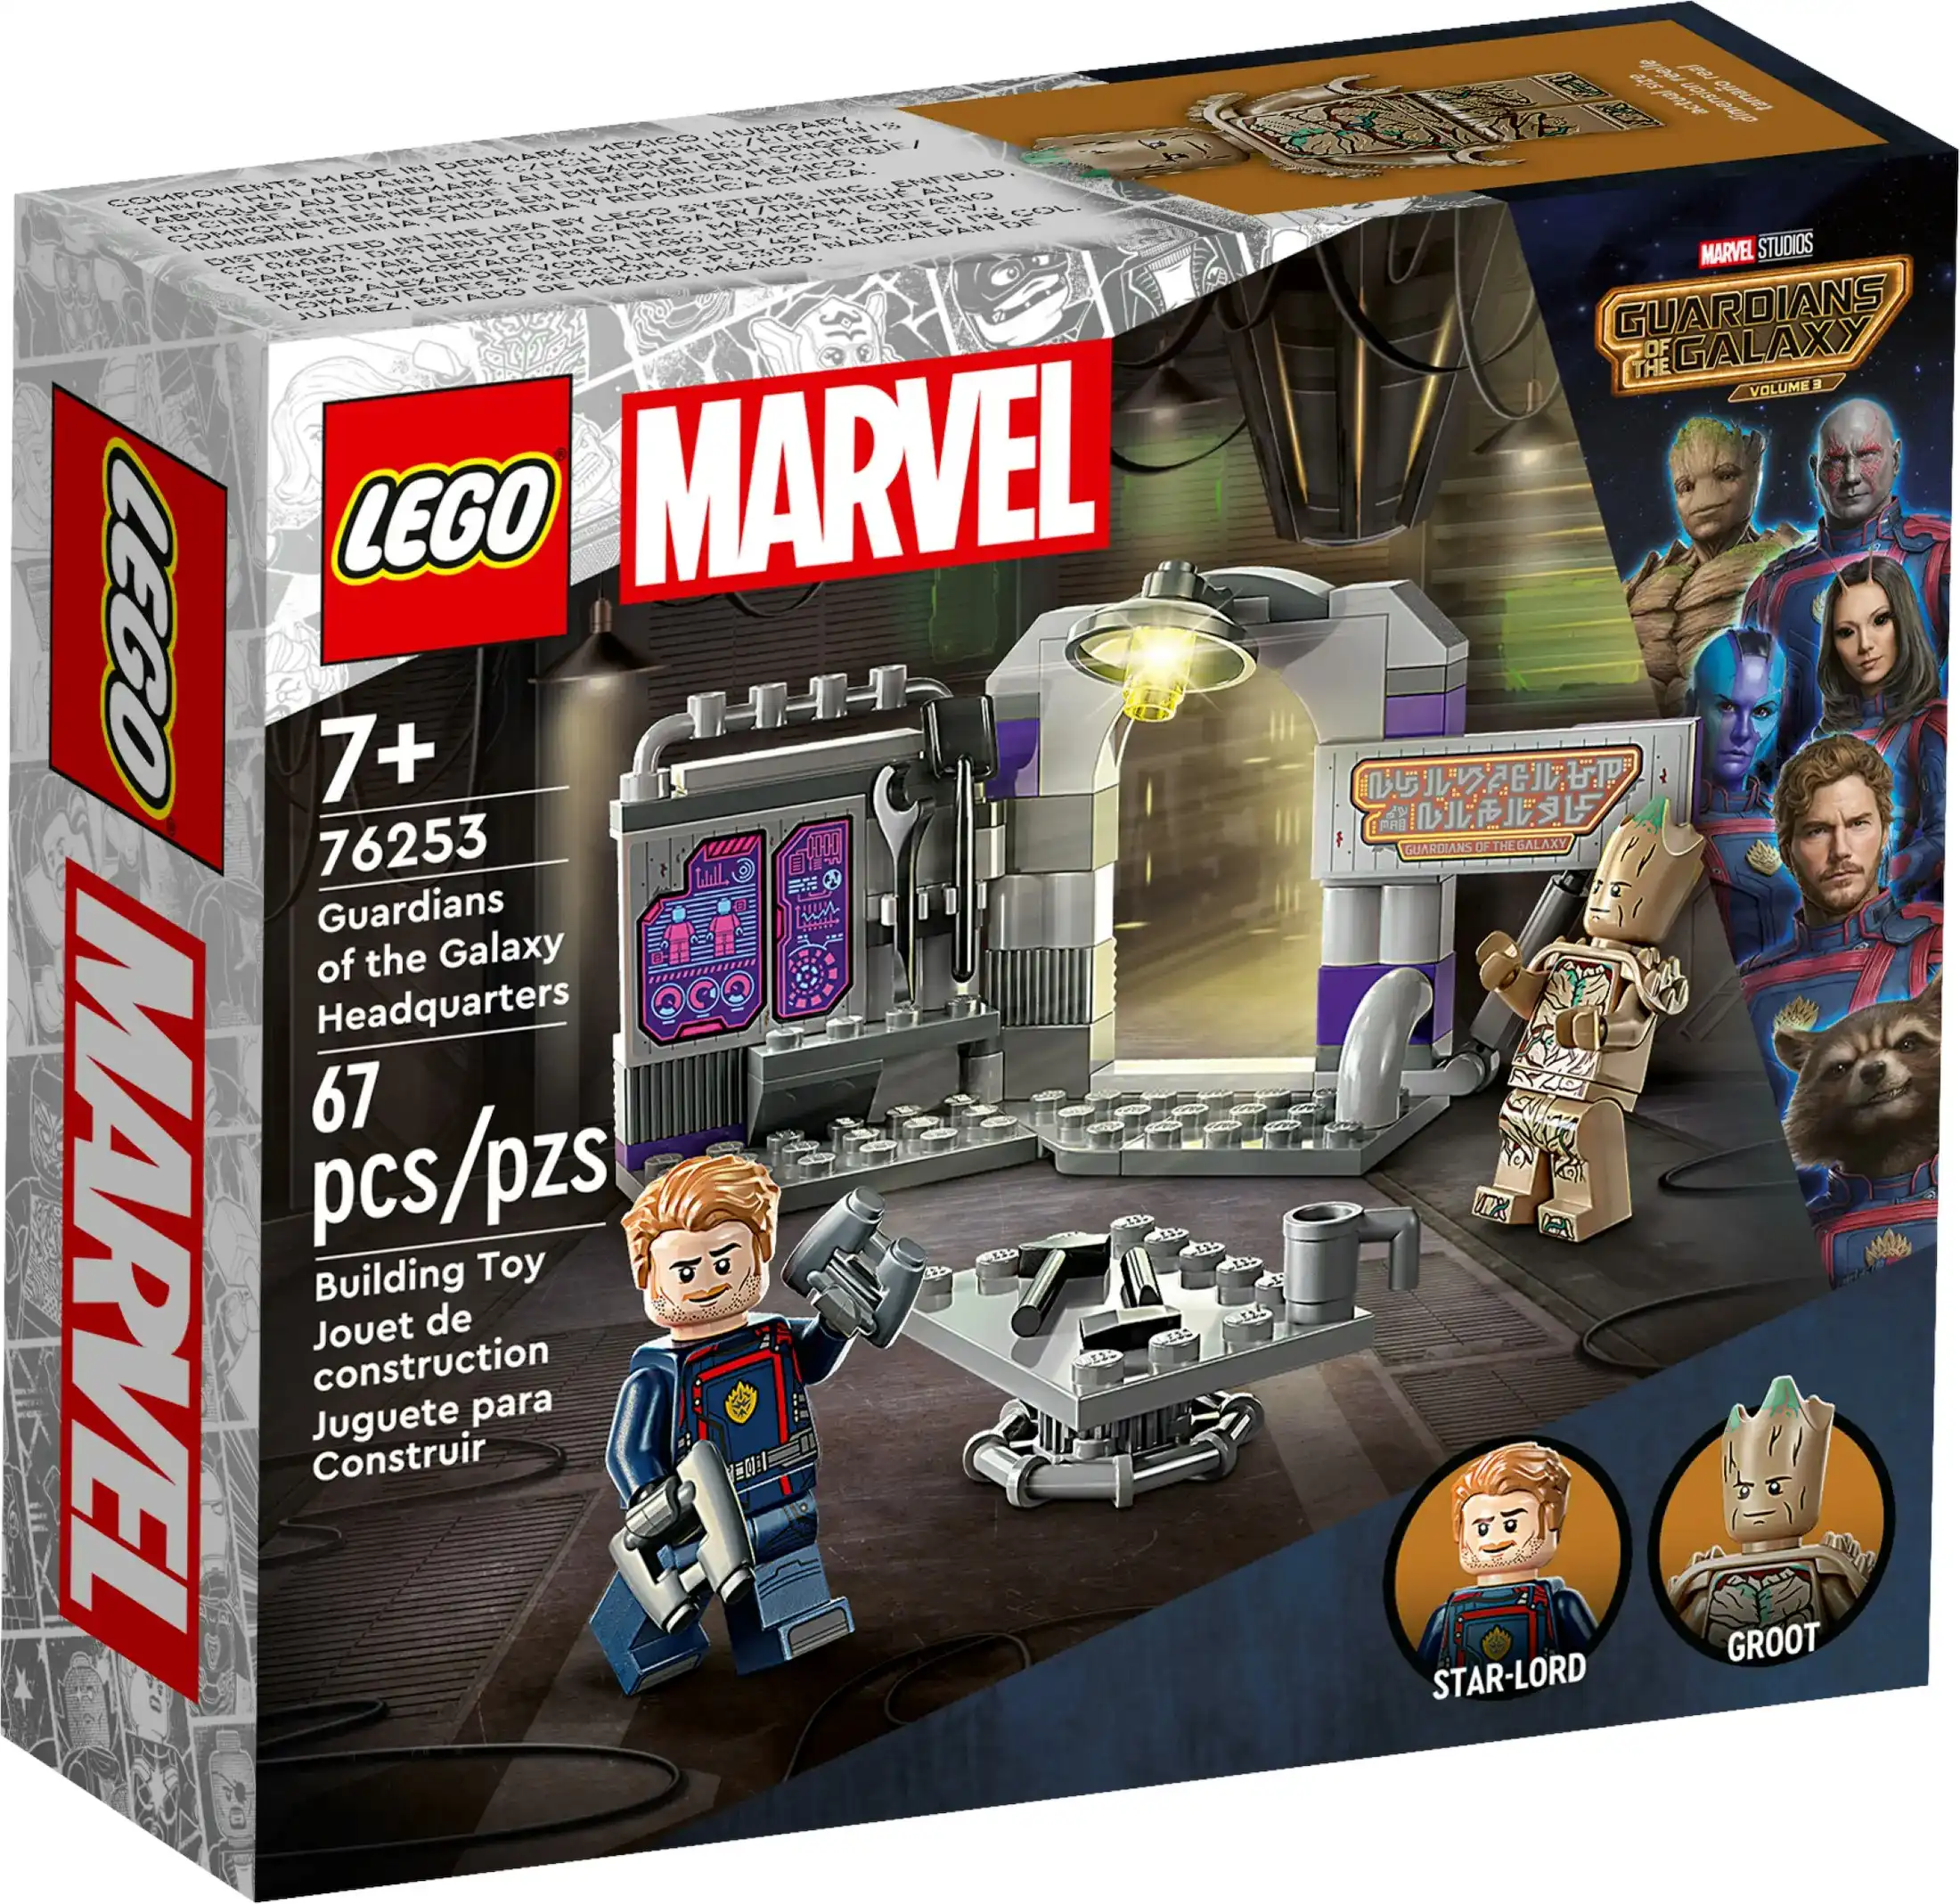 LEGO 76253 Guardians of the Galaxy Headquarters - Marvel Guardians of the Galaxy Volume 3